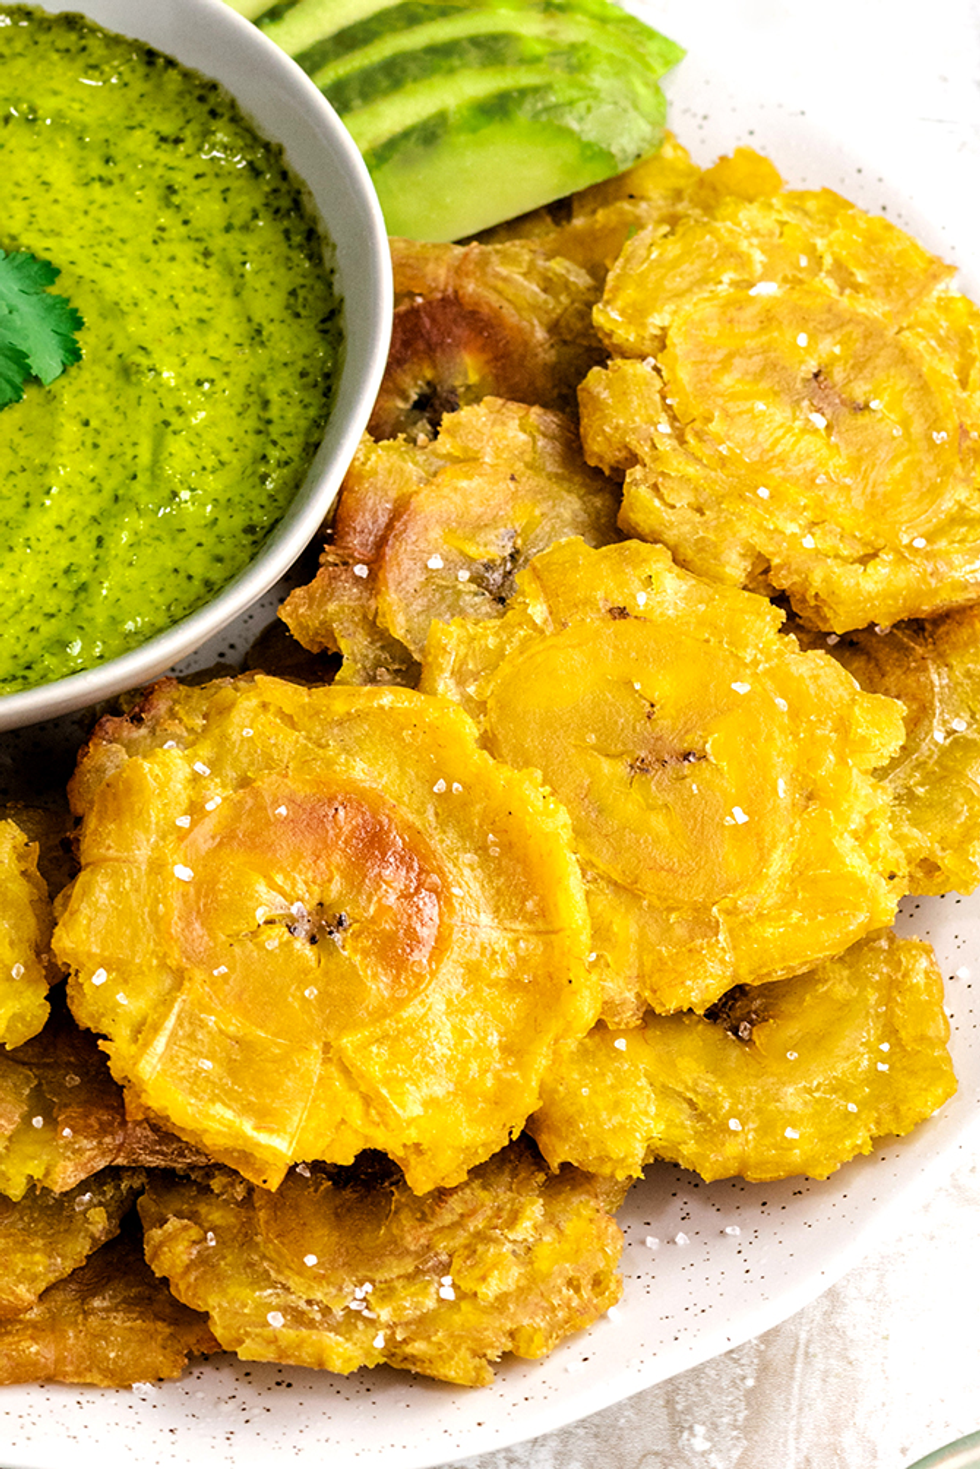 tostones on a plate with avocado and caldo